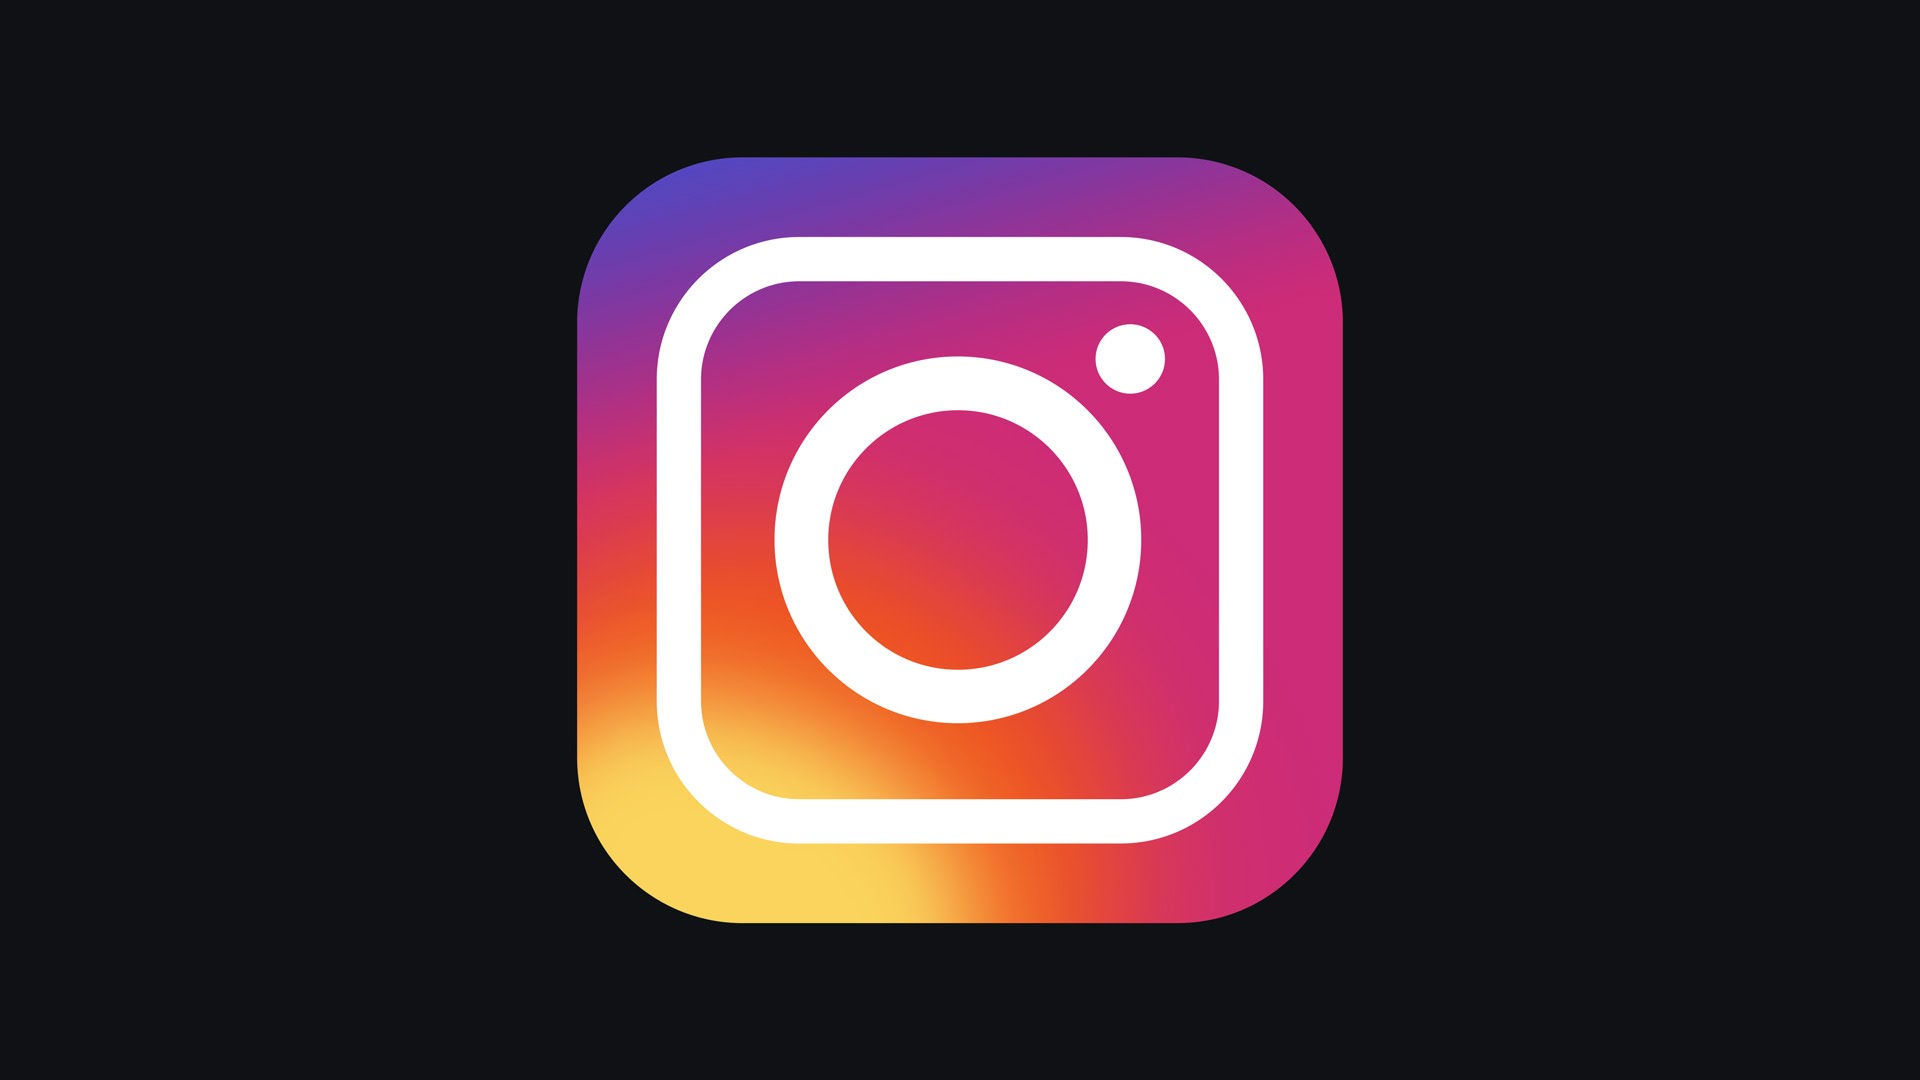 Instagram adds the ability to organize posts into private collections